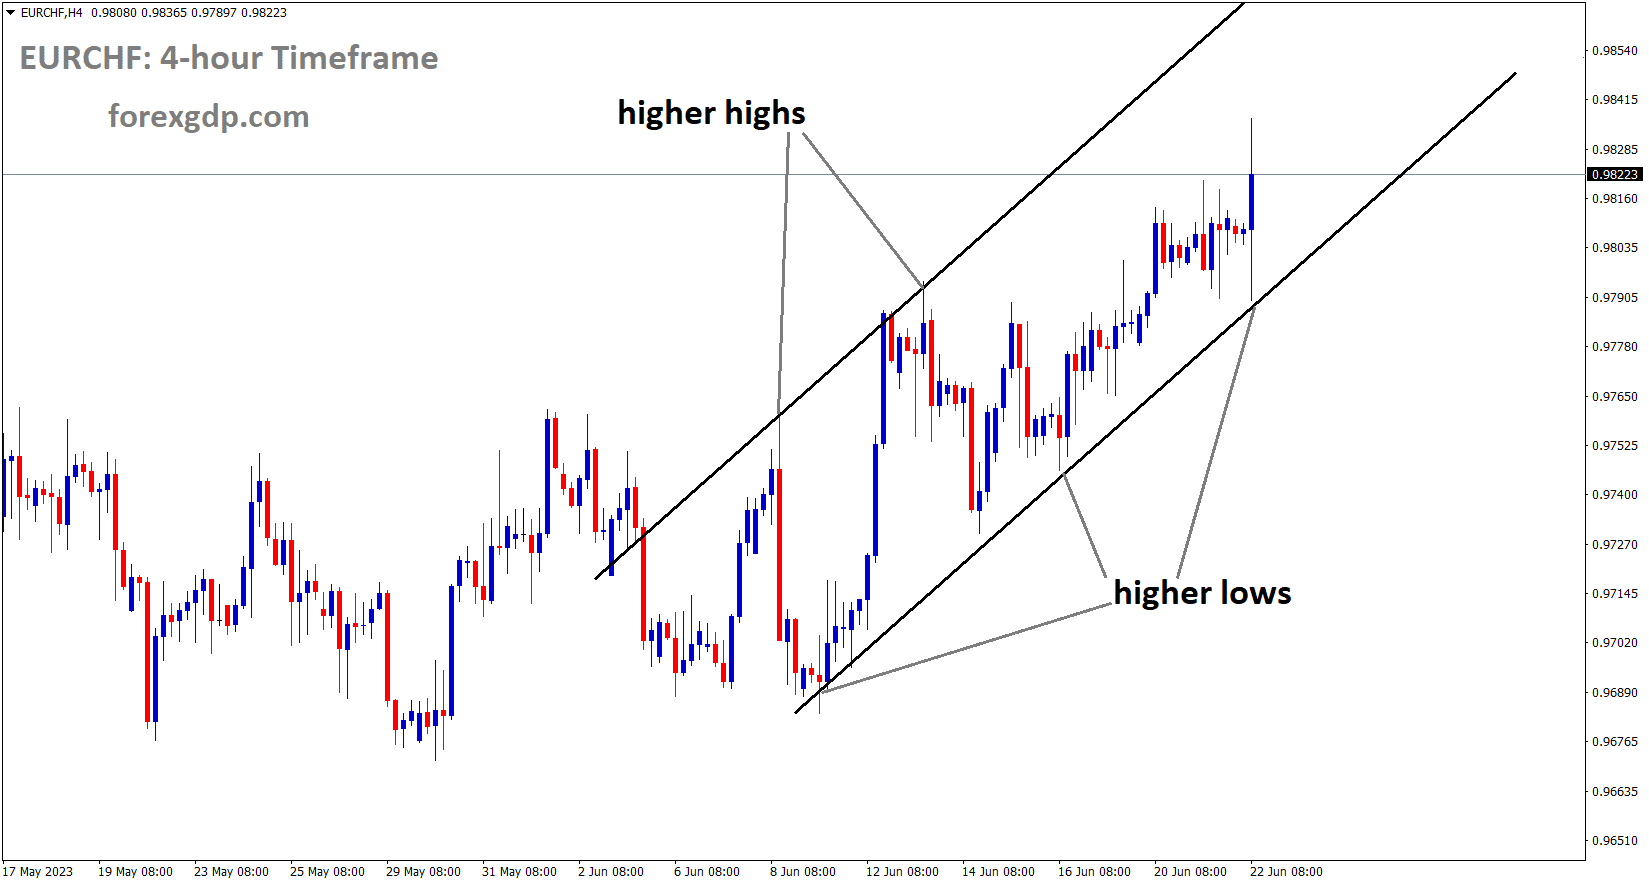 EURCHF is moving in an Ascending channel and the market has rebounded from the higher low area of the channel